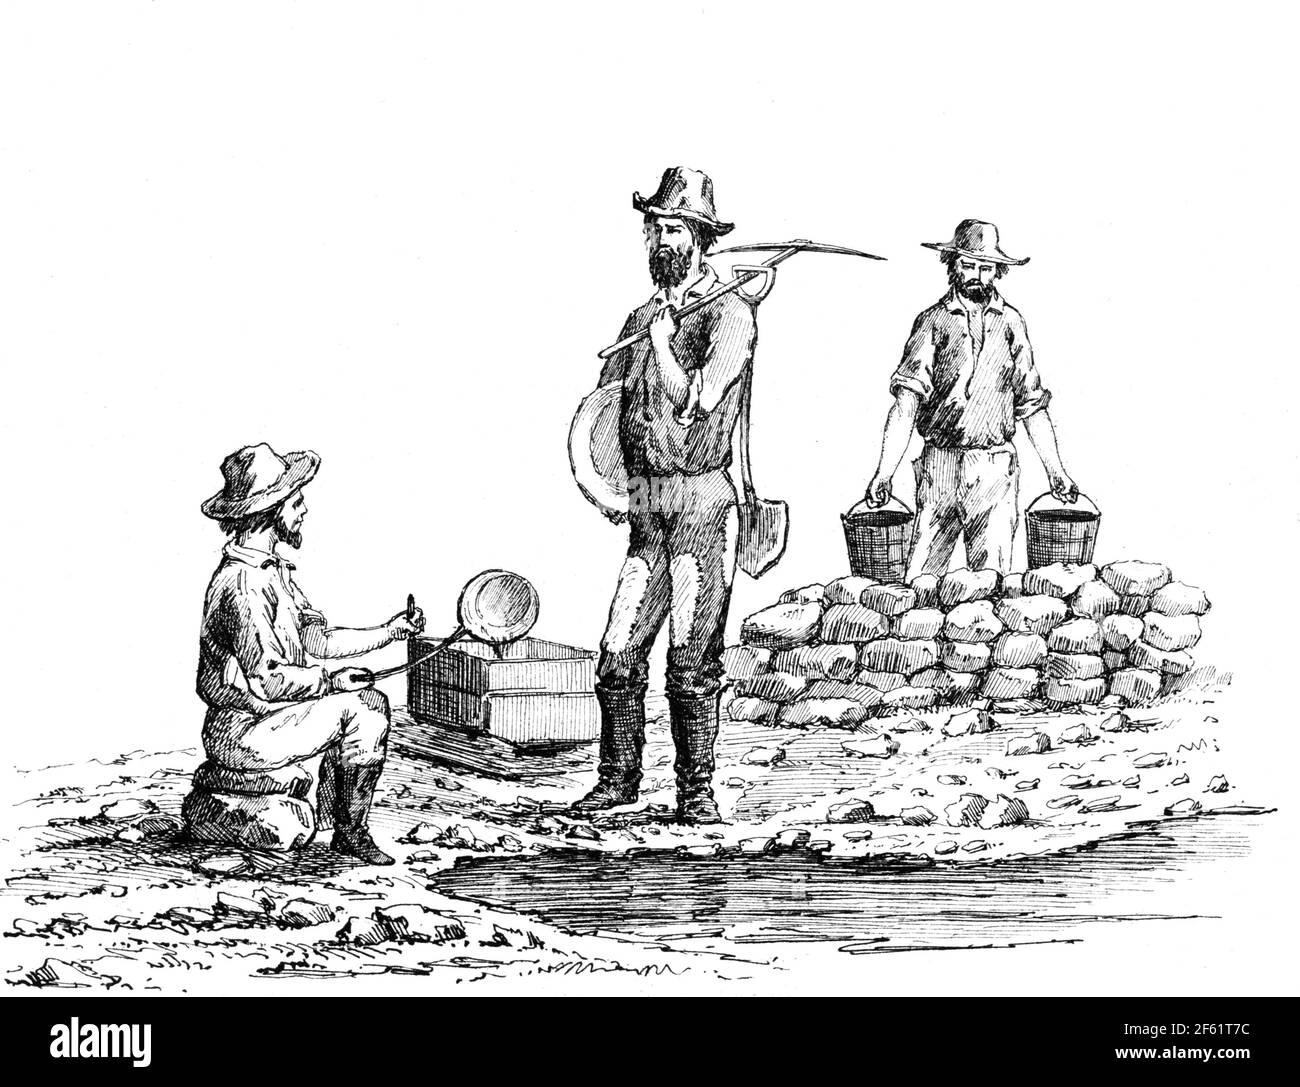 Gold Miners with Equipment, California, 1850s Stock Photo